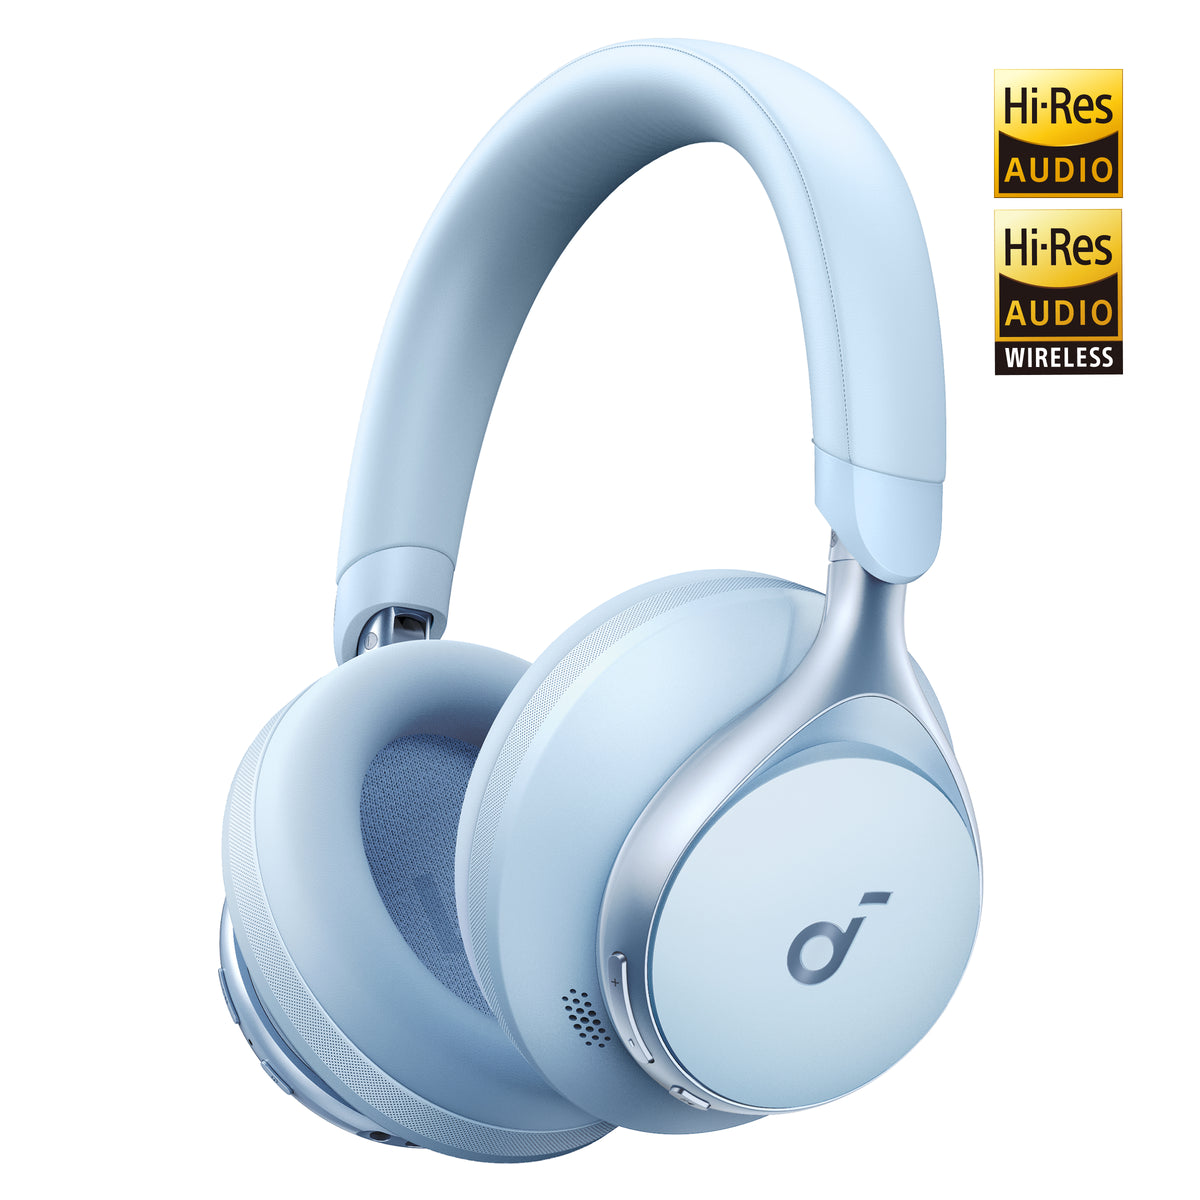 soundcore Space One Noise Cancelling Headphones User Guide